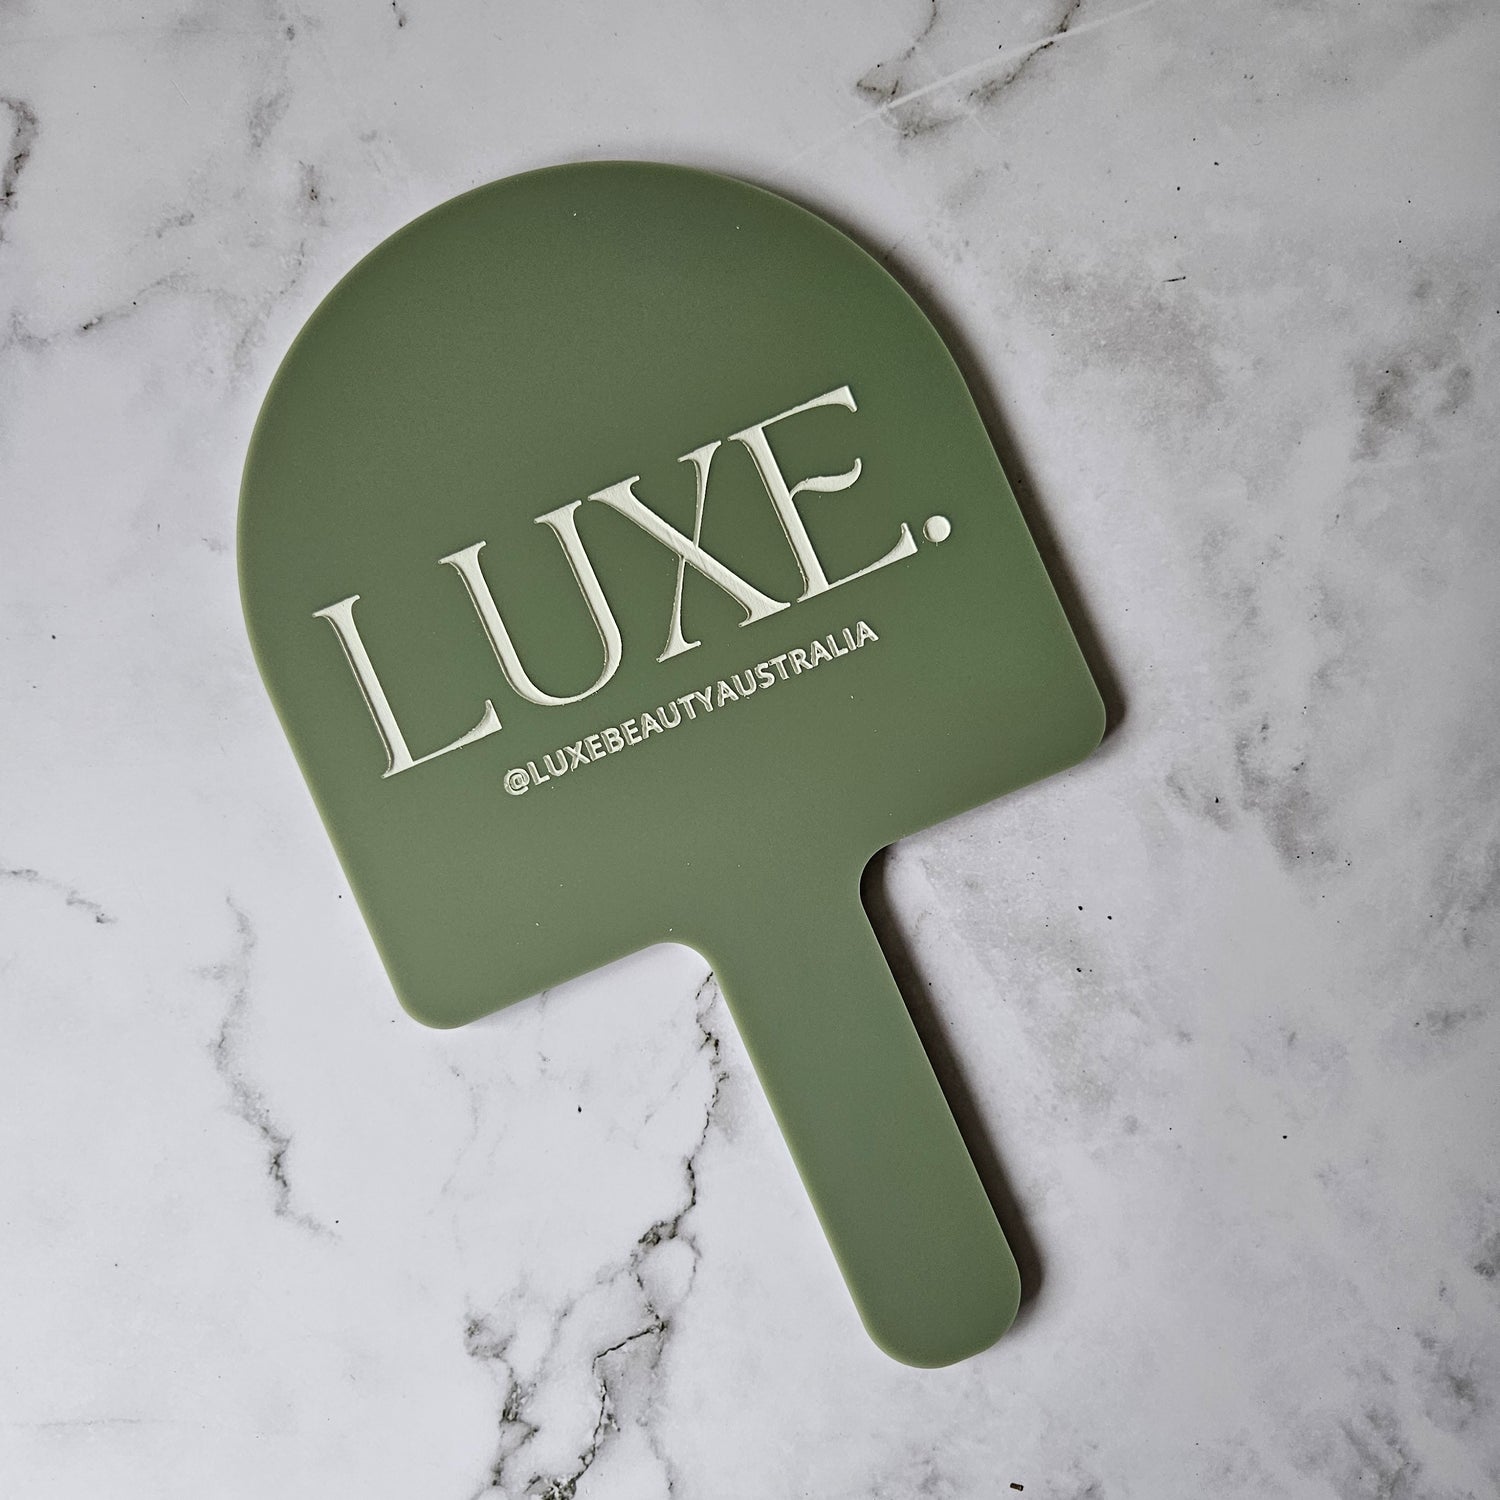 Custom Handheld Mirror with Logo for Beauty Salon - Arch handheld mirror in olive green acrylic with white logo